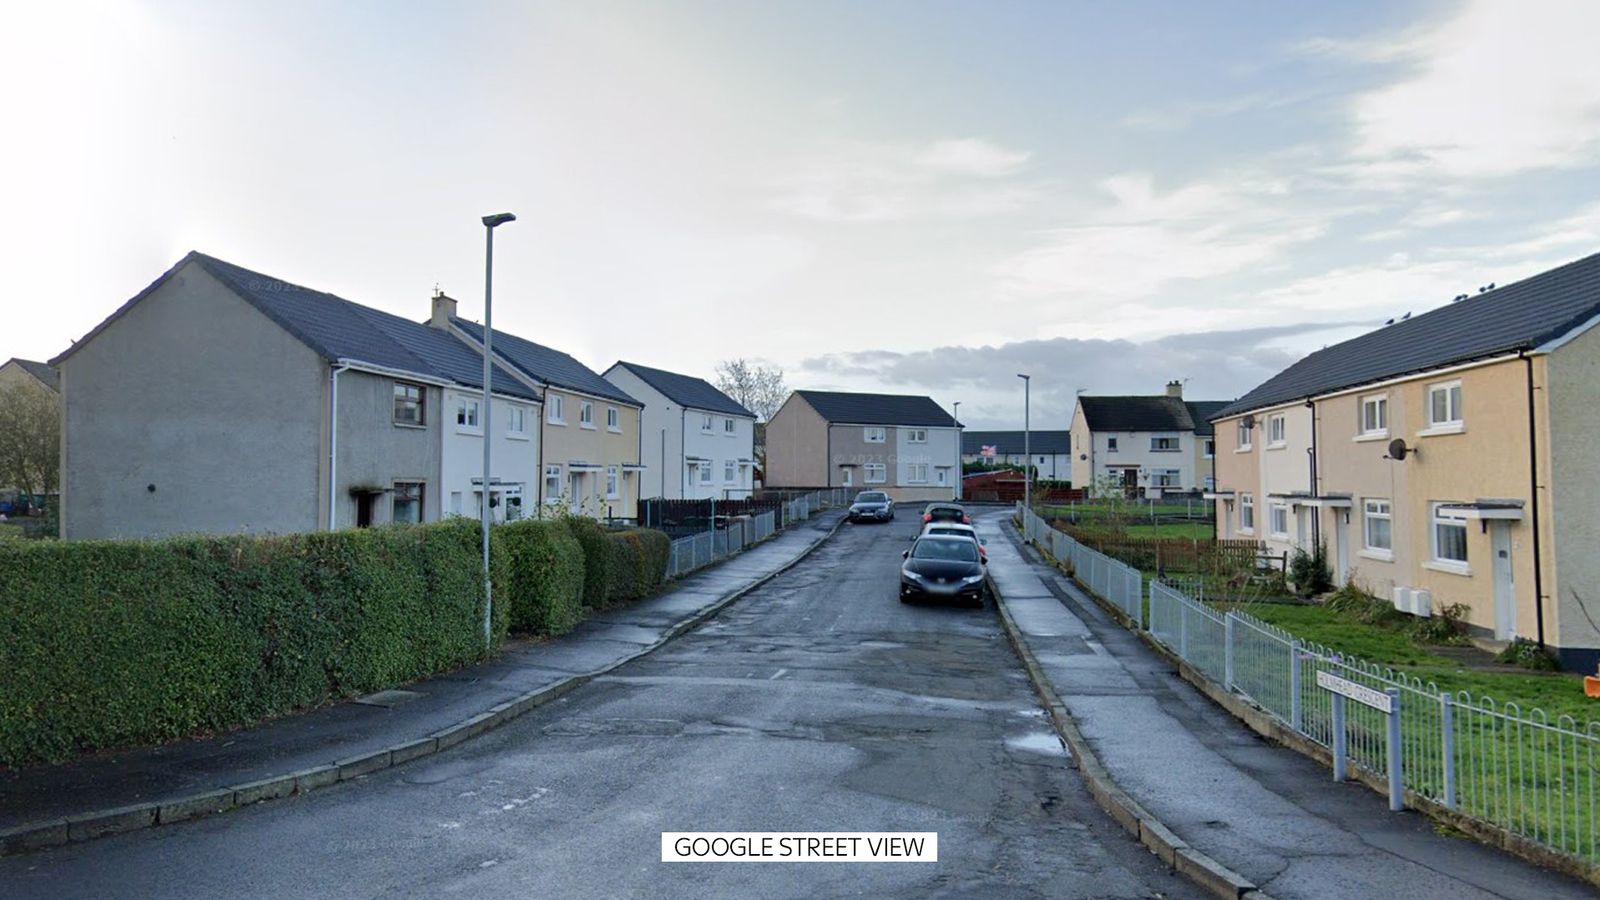 Woman charged after children attacked and injured by XL bully dog in East Ayrshire